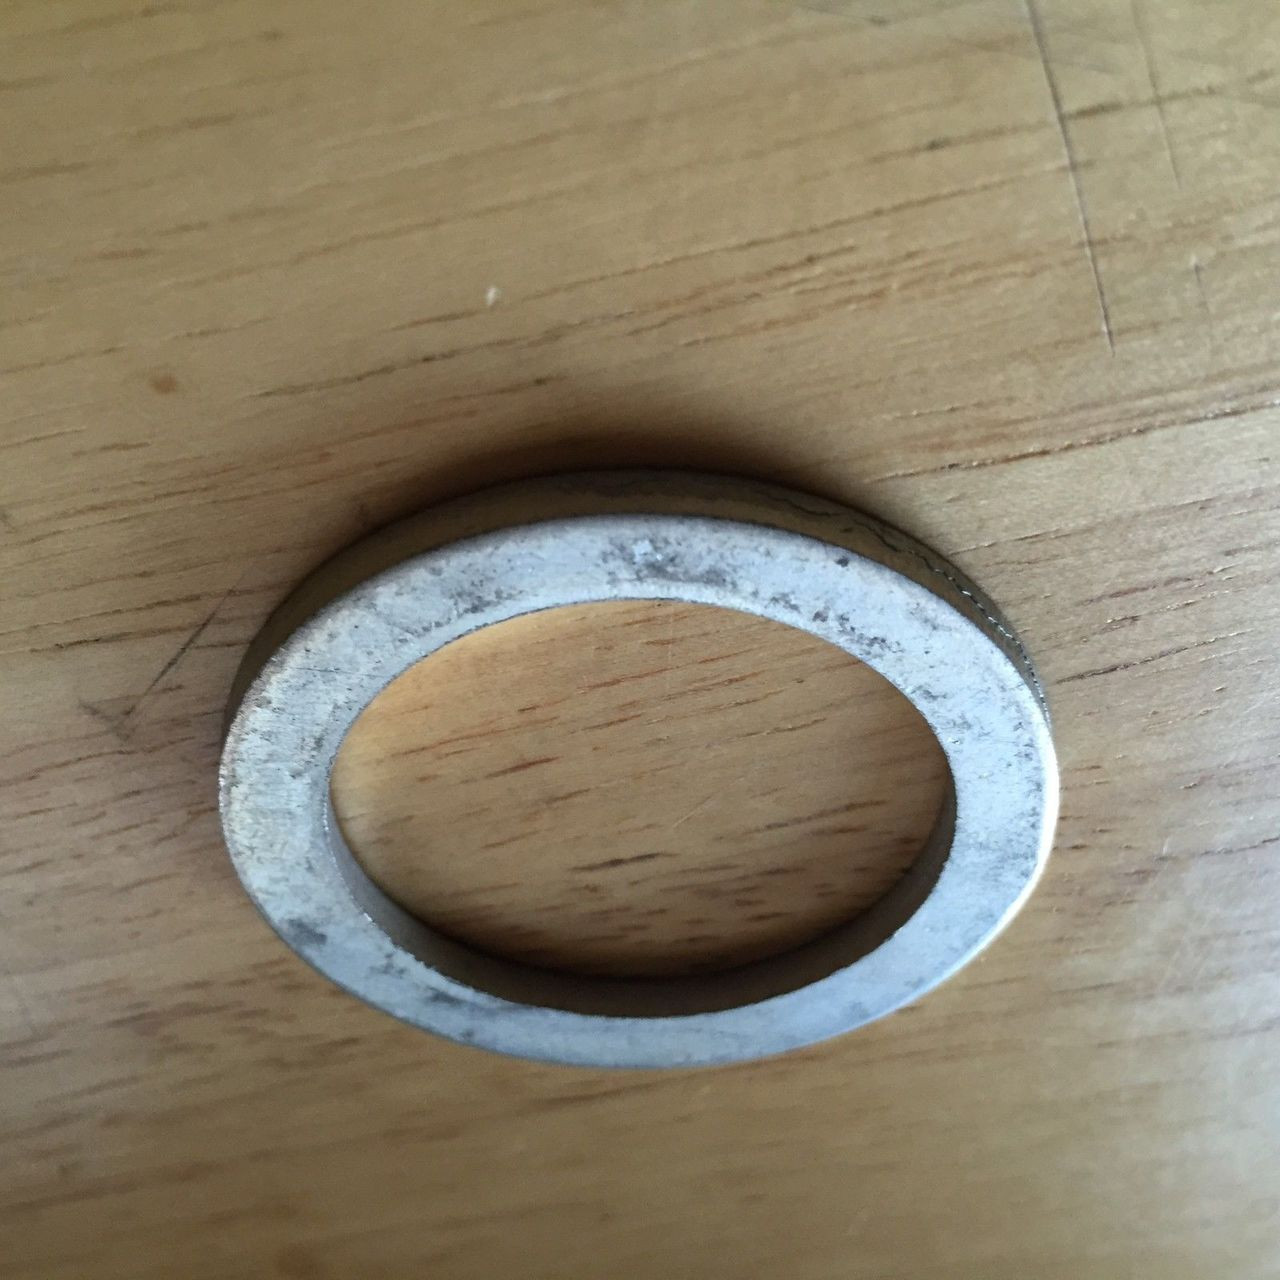 3.0 MM TRIPLE TREE SPACER WASHER - 31411231204